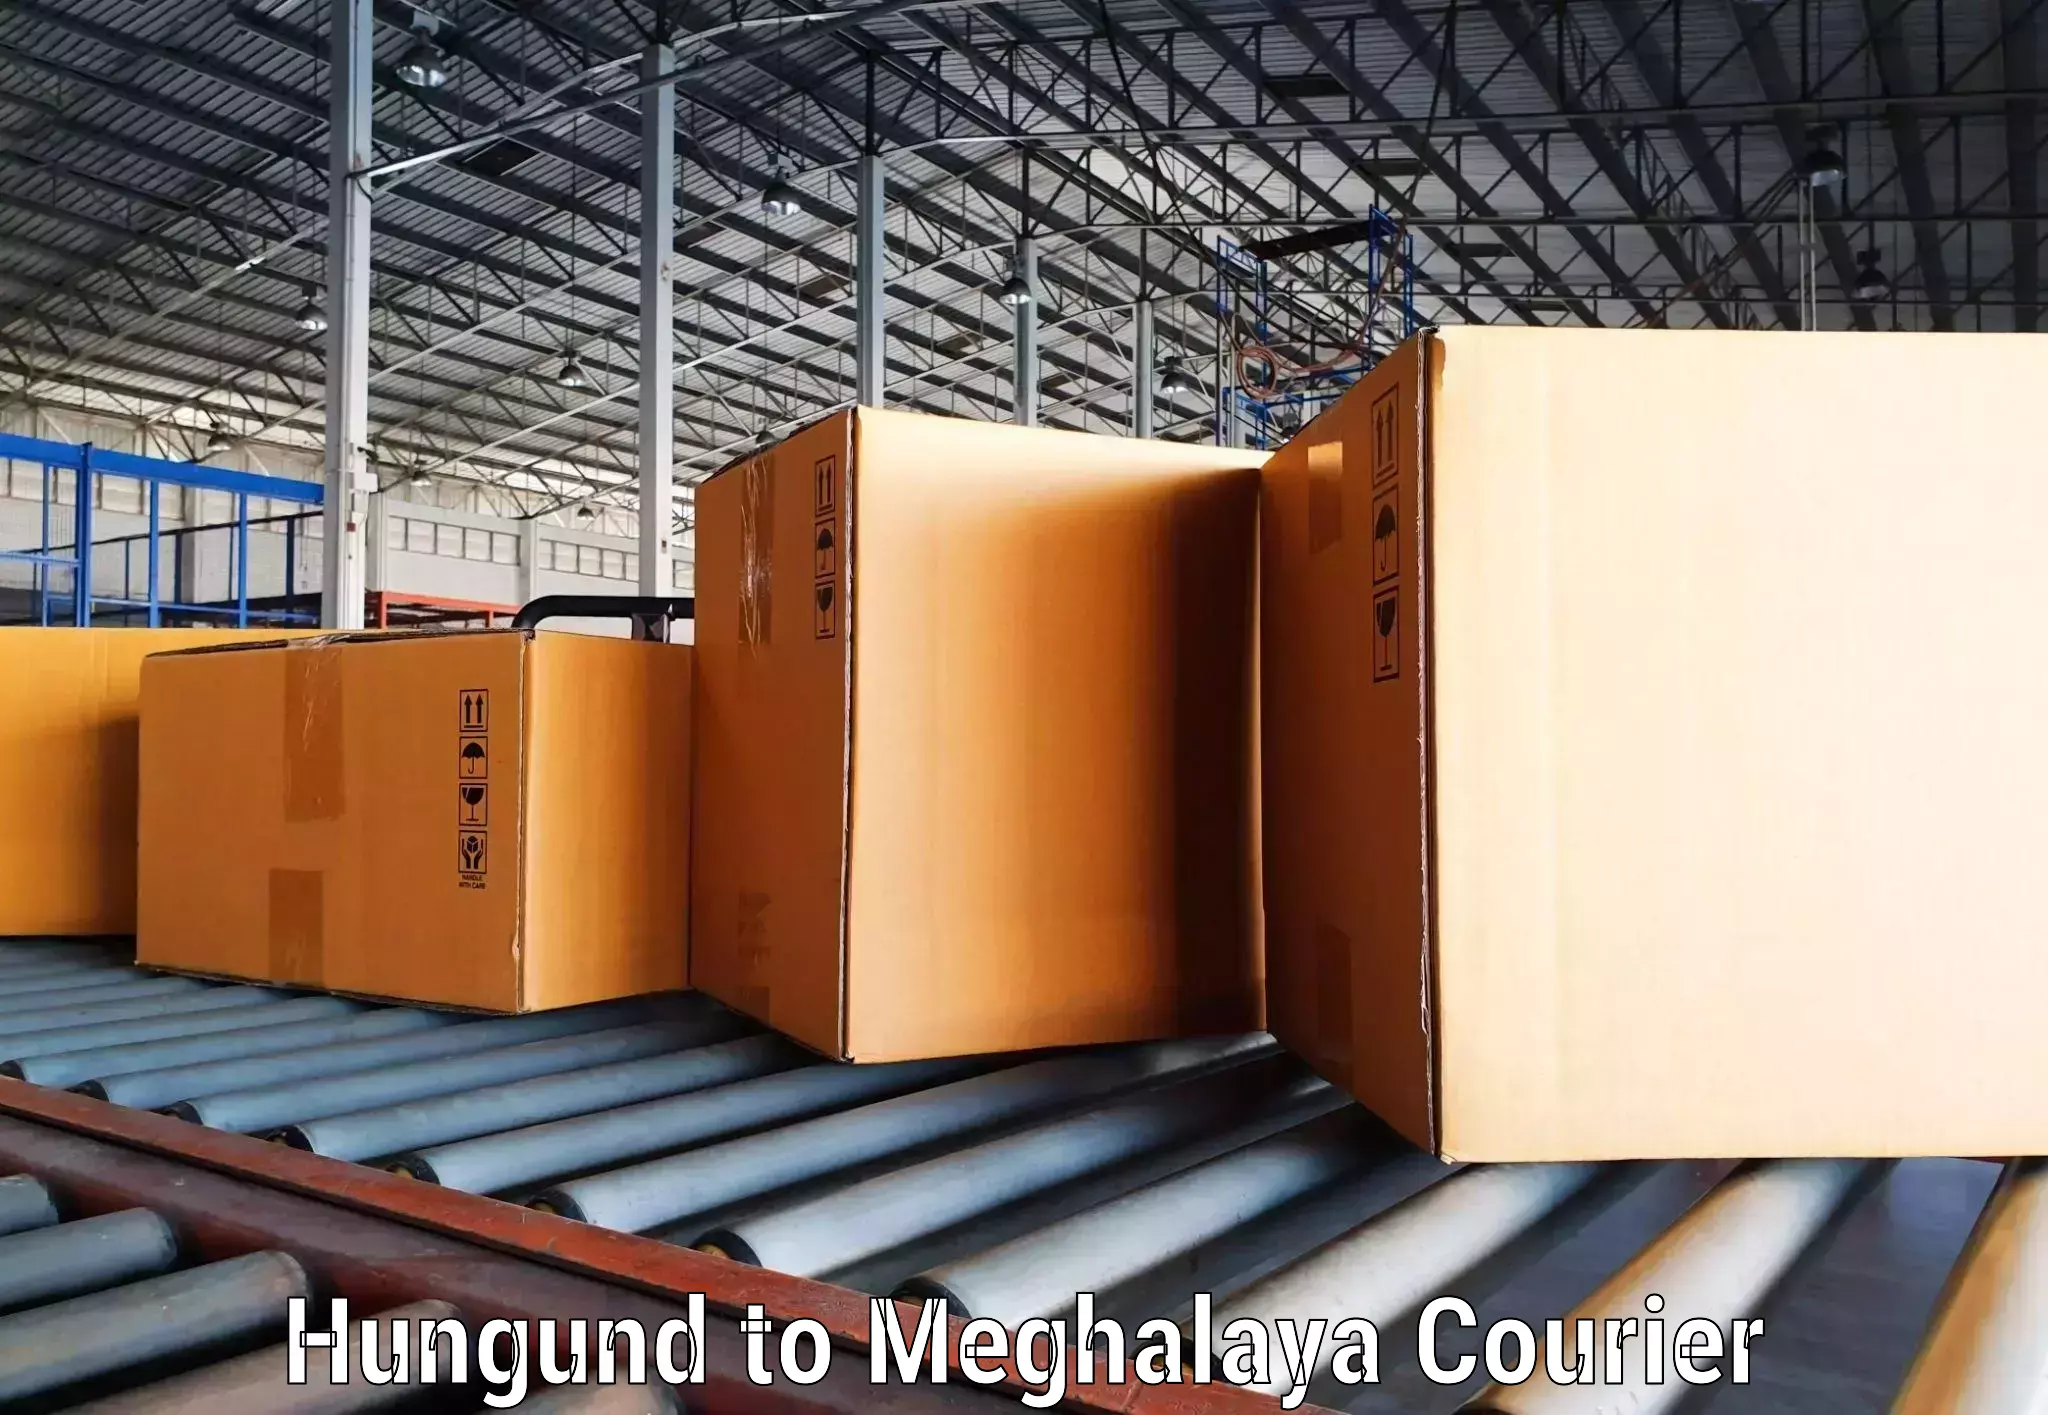 Express delivery capabilities Hungund to Meghalaya